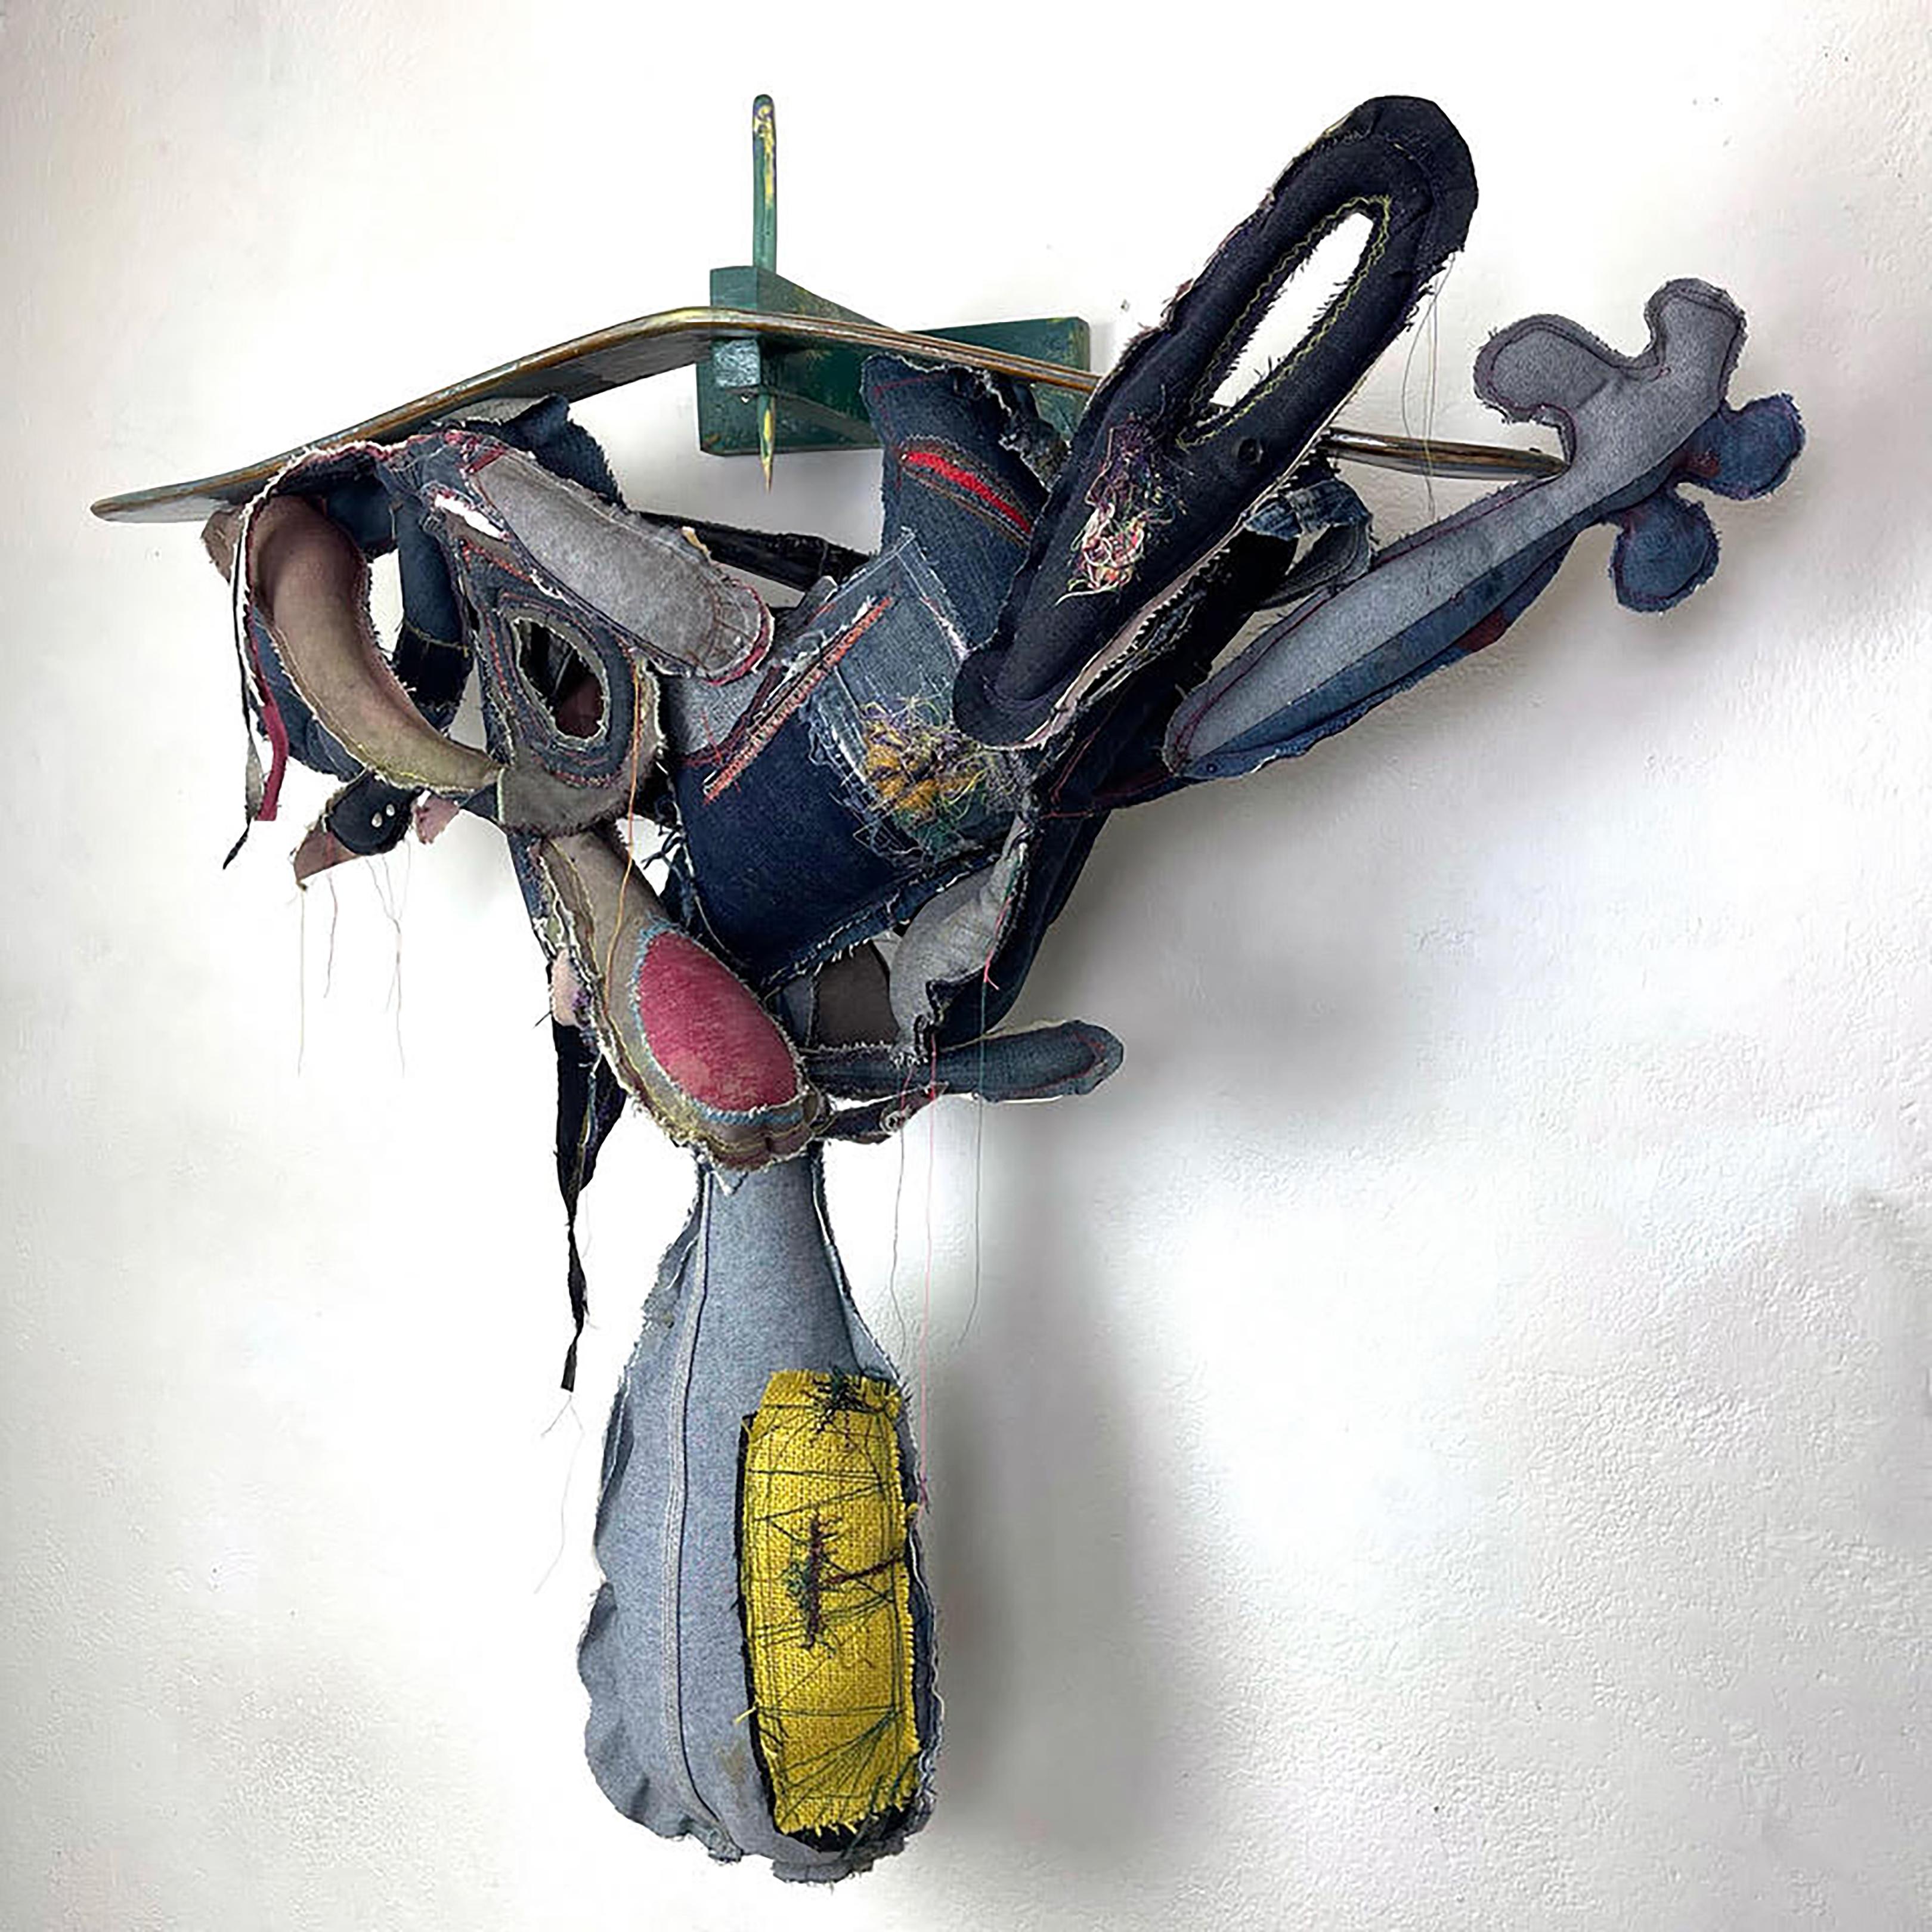 Duane Paul Abstract Sculpture - "Playground Punching Bag" Mixed Media Sculpture